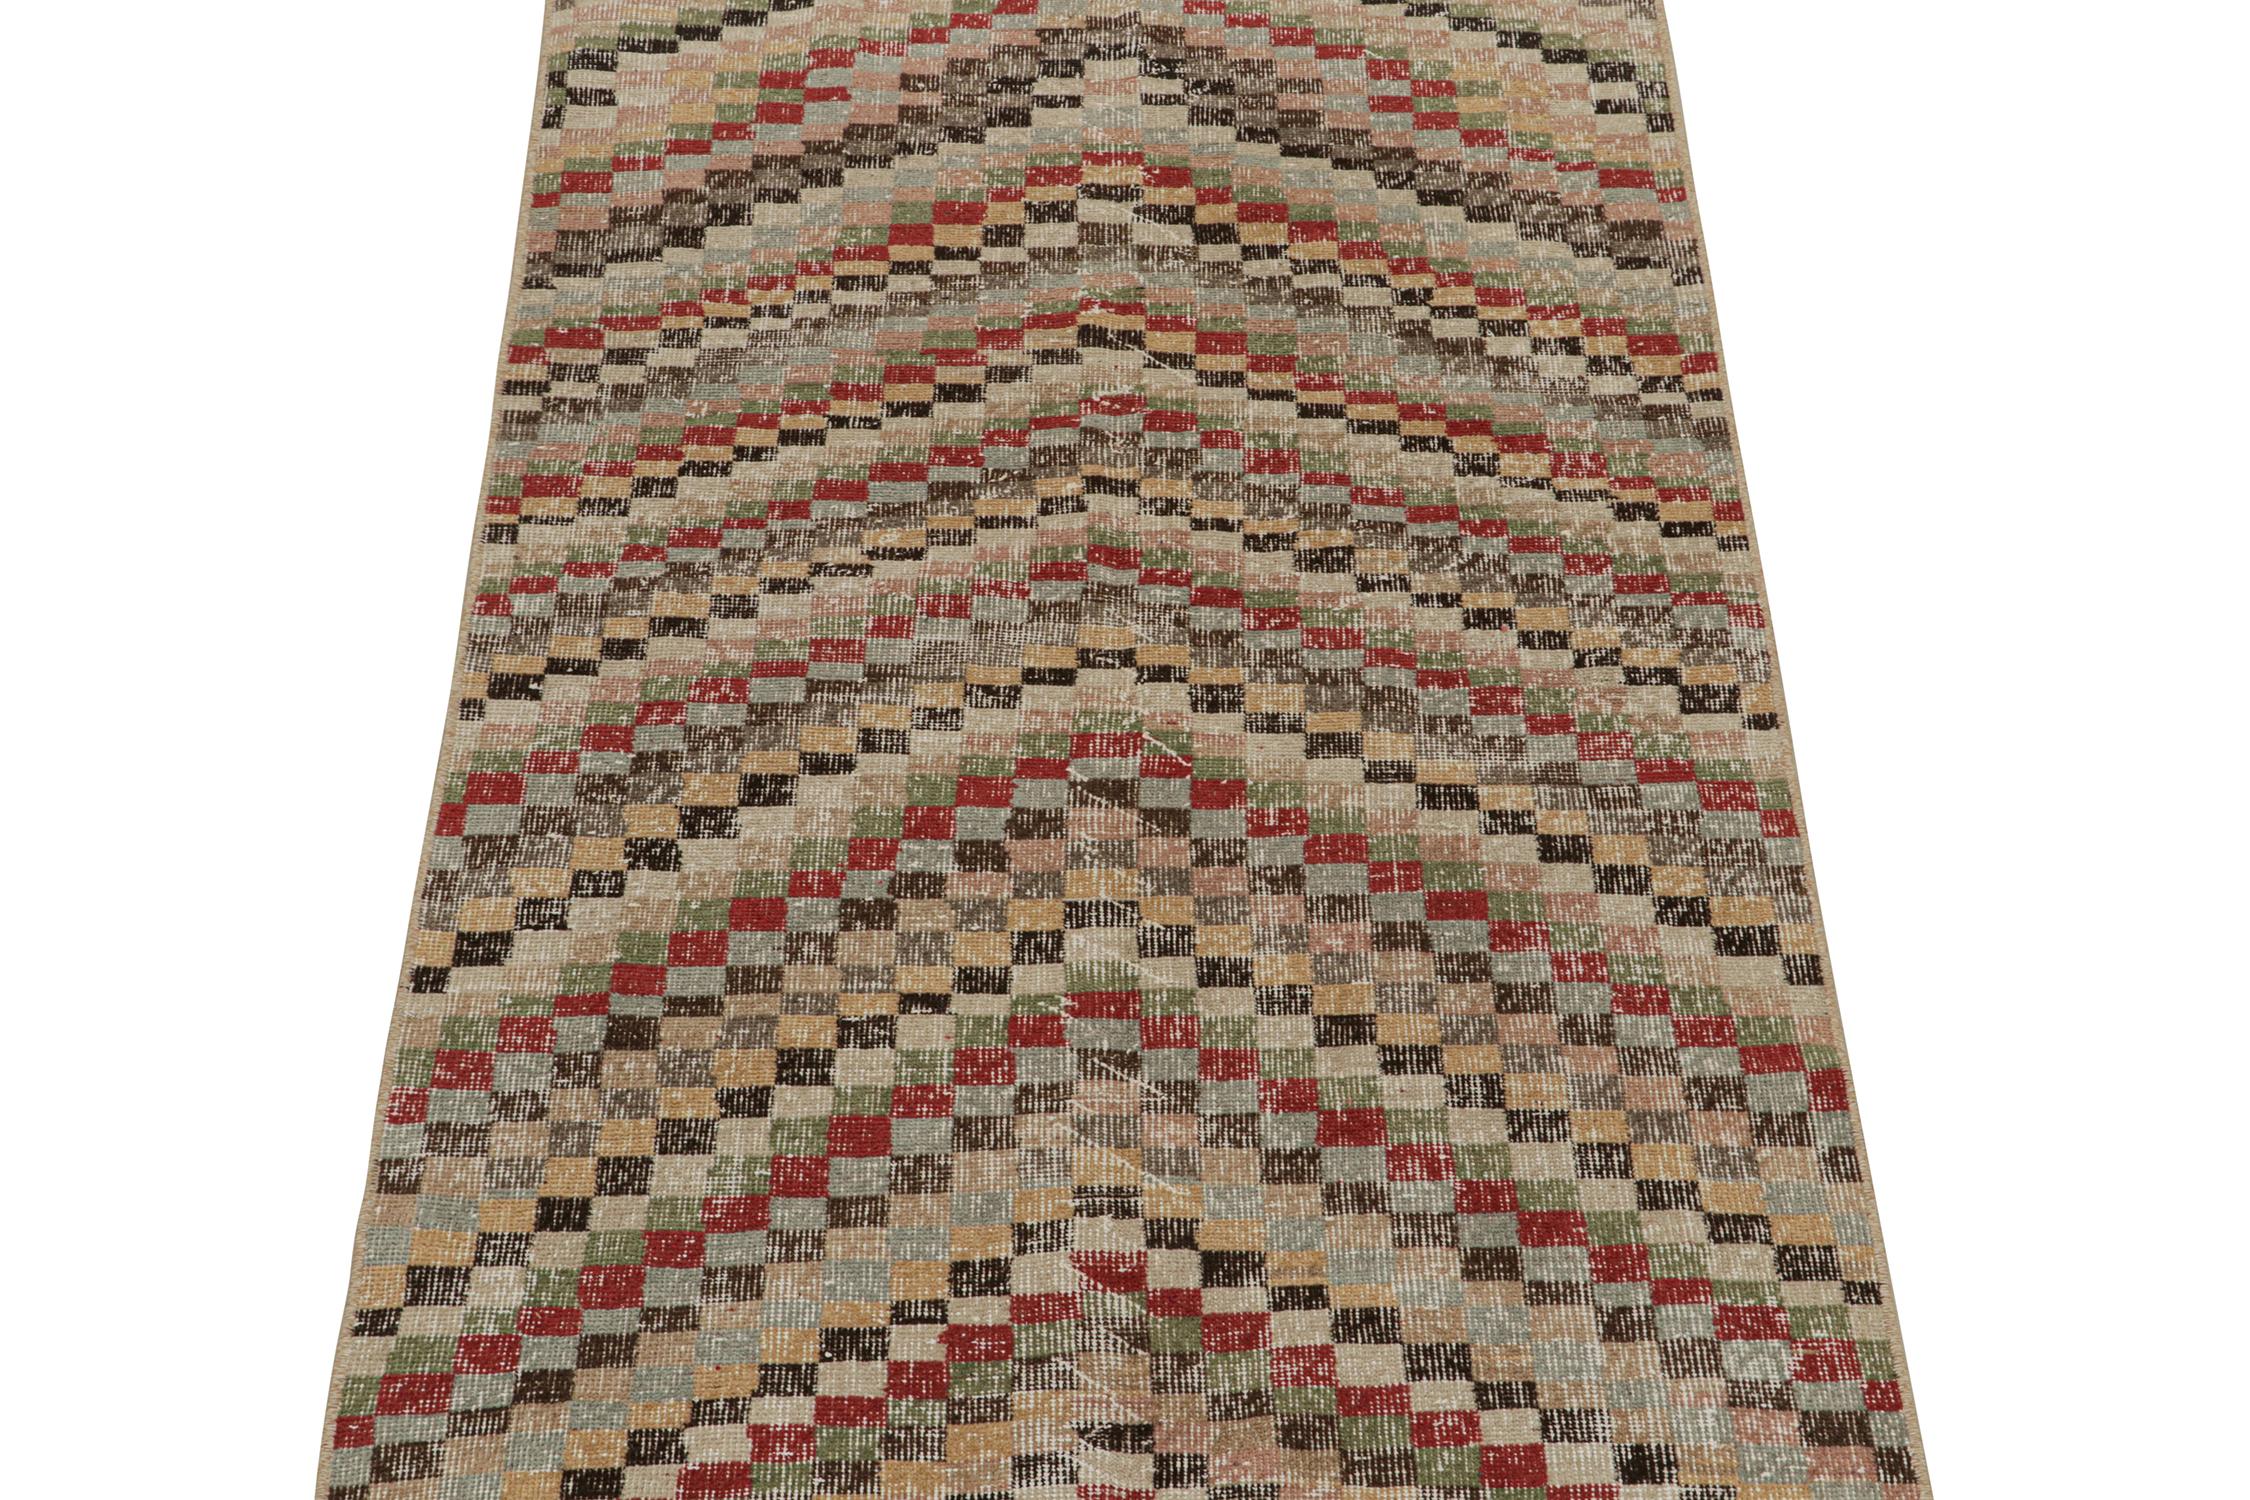 This vintage 4x6 rug is a new addition to Rug & Kilim’s Mid-Century Pasha Collection. This line is a commemoration, with rare curations we believe to hail from multidisciplinary Turkish designer Zeki Müren.

Further on the Design:

This